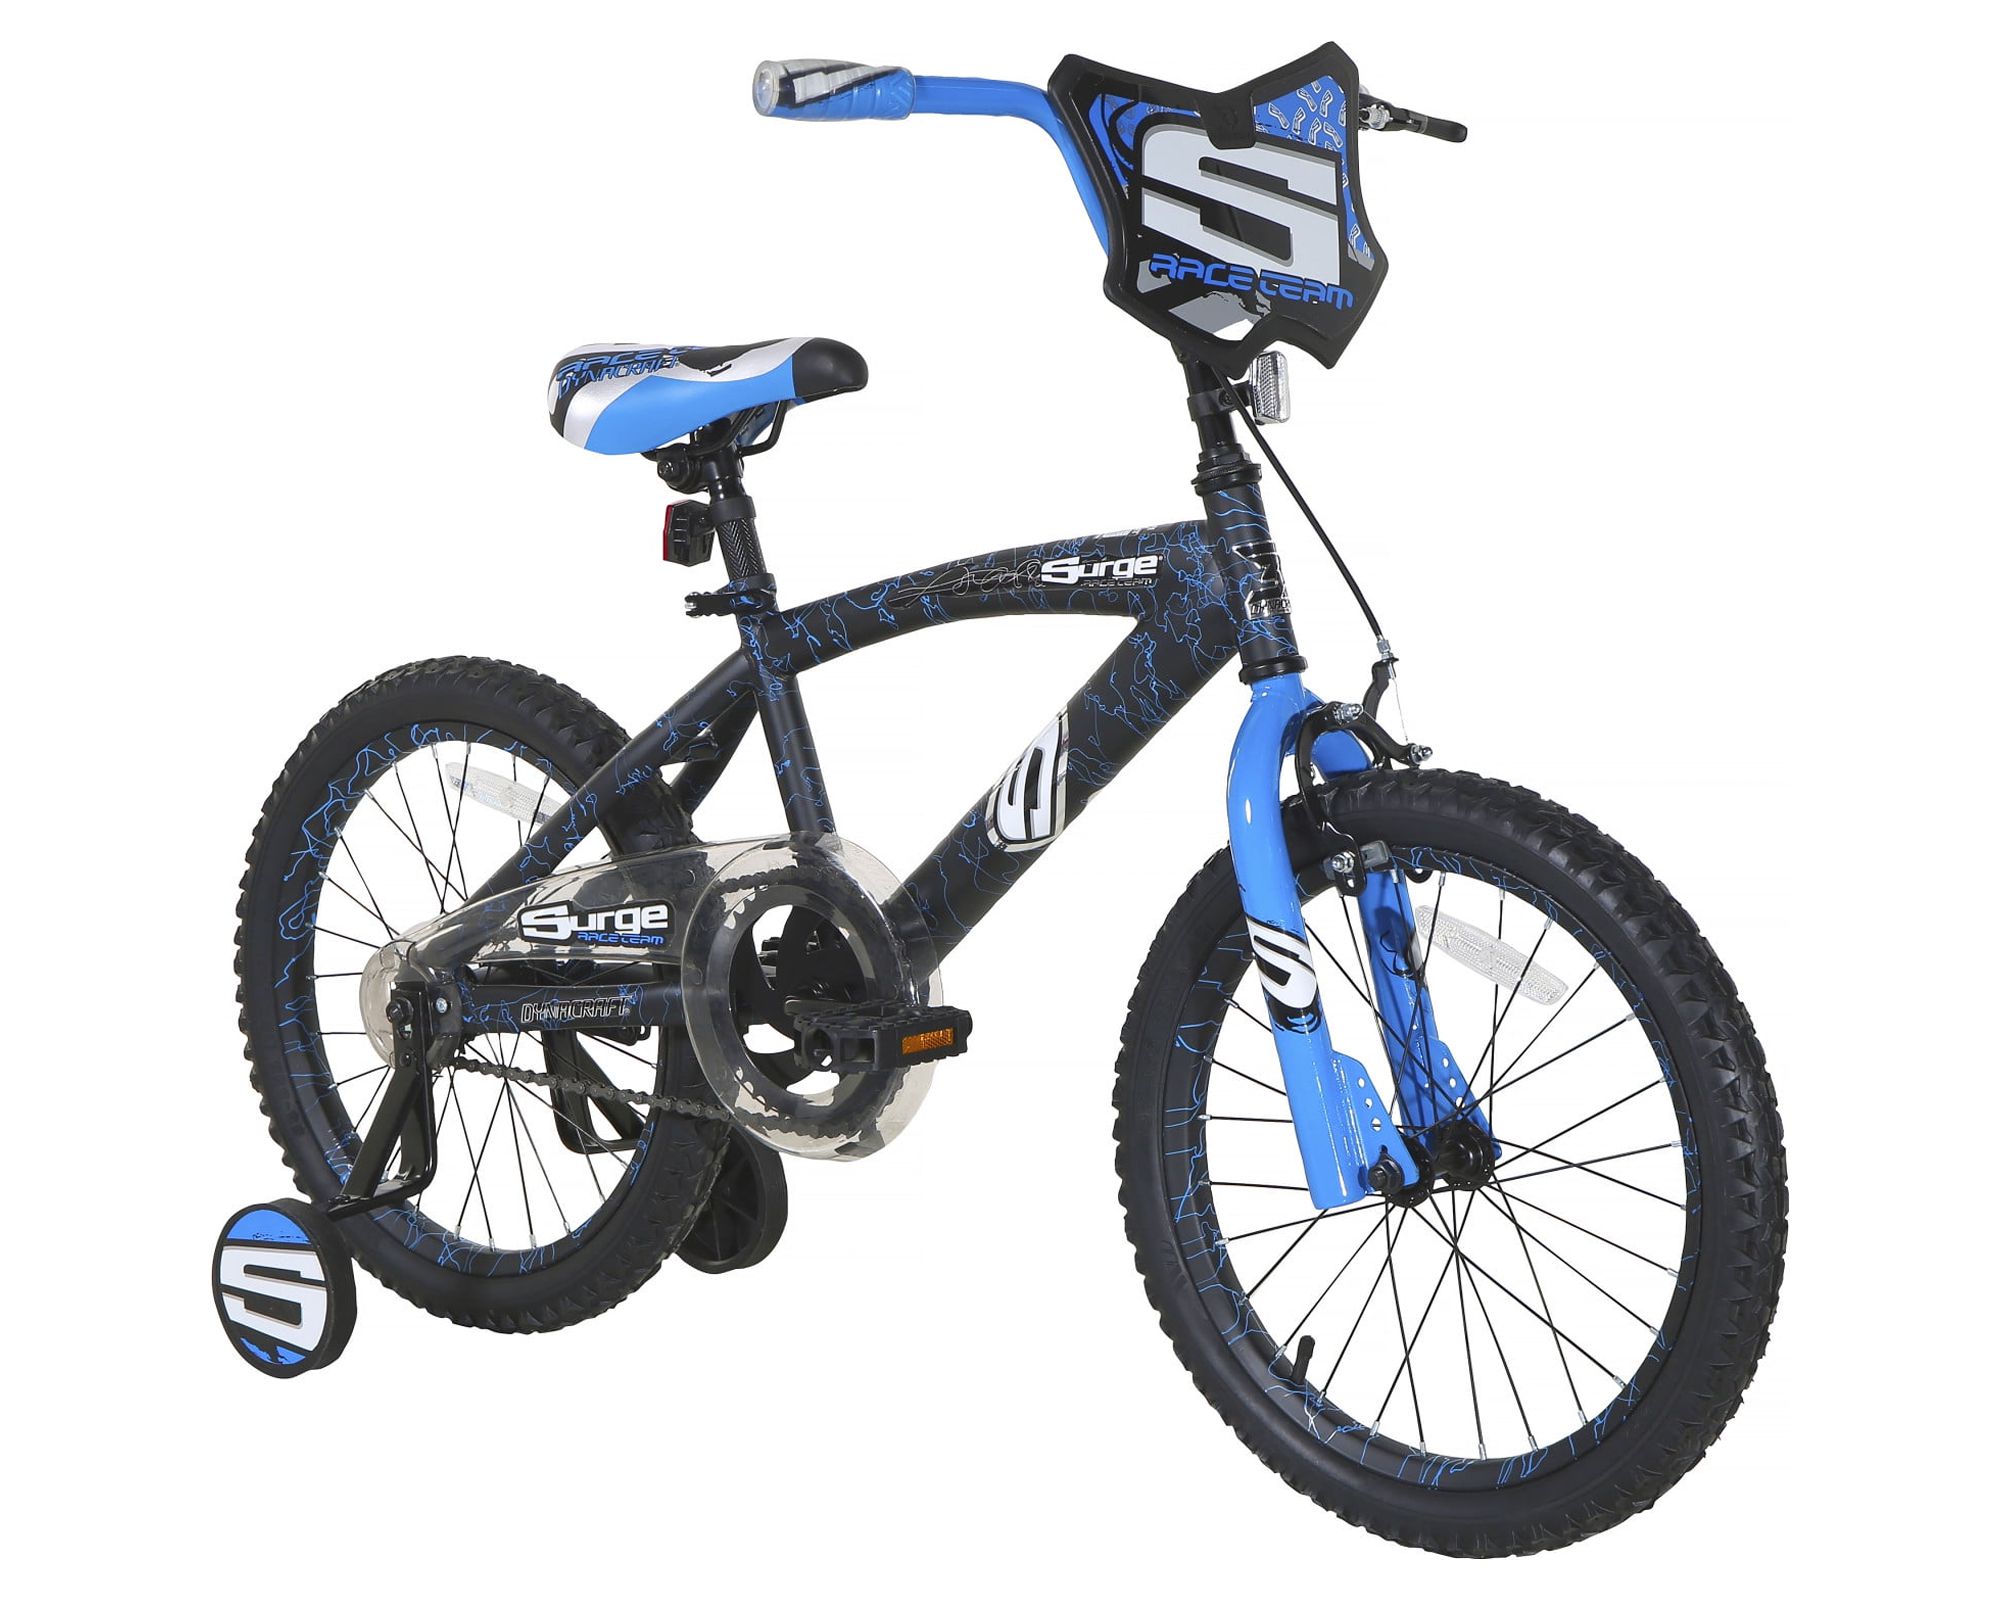 Dynacraft Surge18-inch Boys BMX Bike for Age 6-9 Years - image 1 of 11